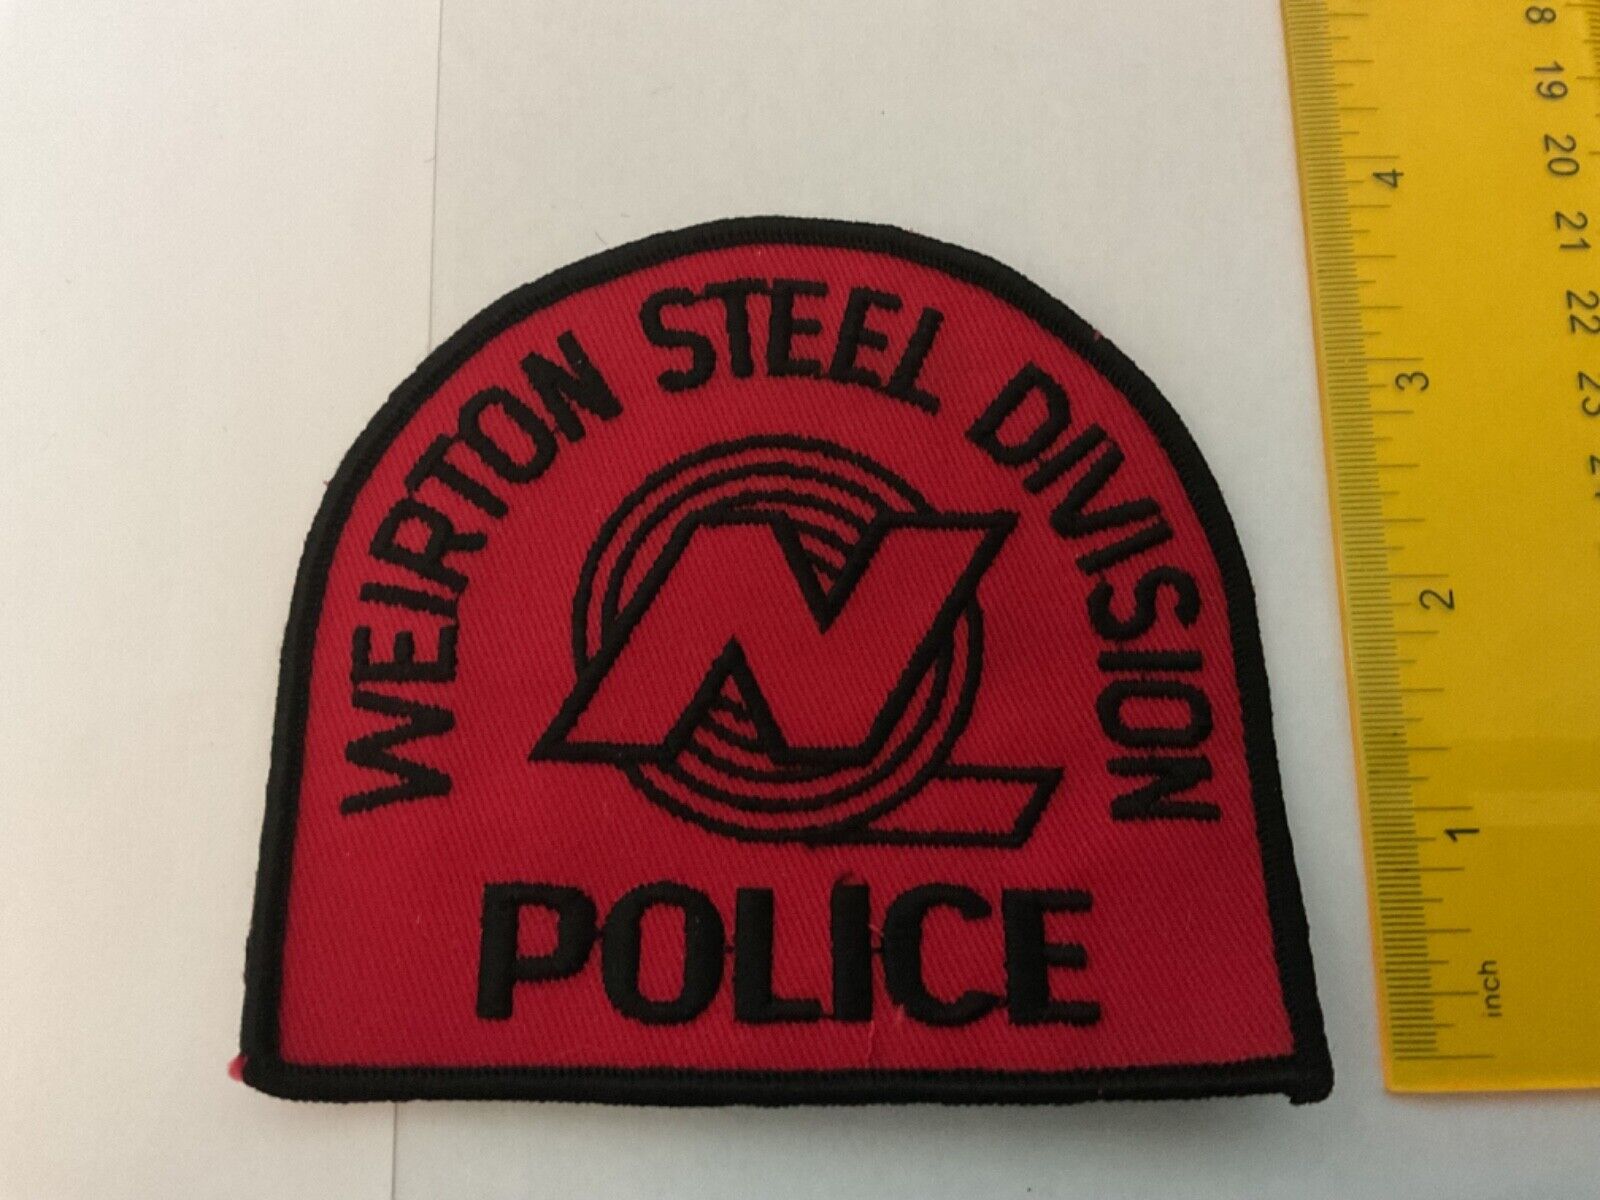 Weirton Steel Division Police collectible patch full size not worn vintage old